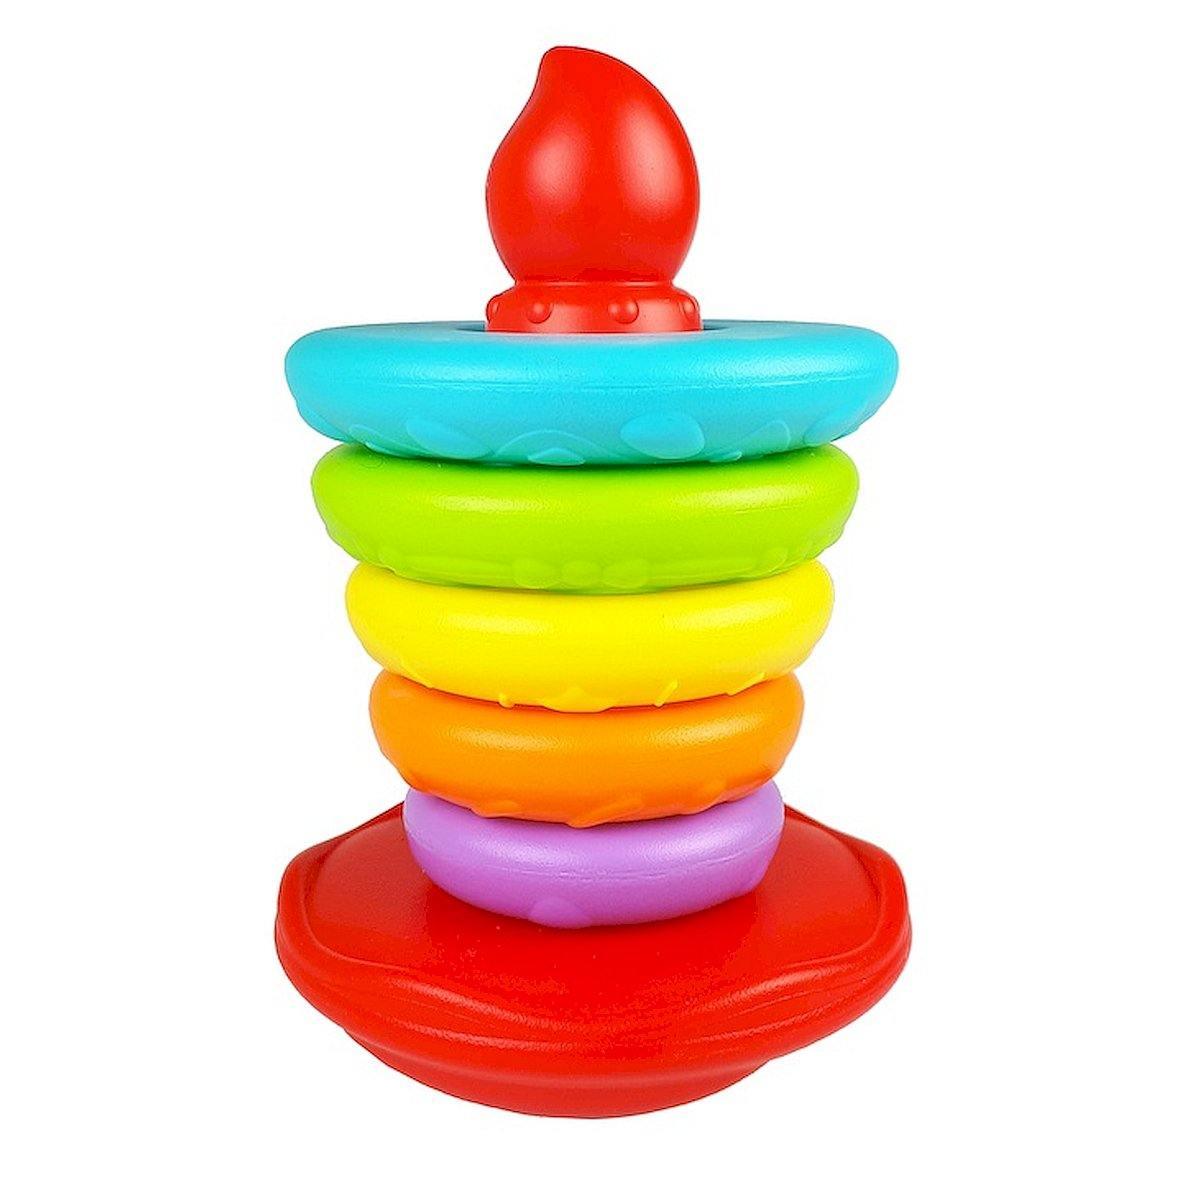 WinFun Wobble Cake Stacker - BumbleToys - 2-4 Years, Cecil, Nursery Toys, Play-doh, Unisex